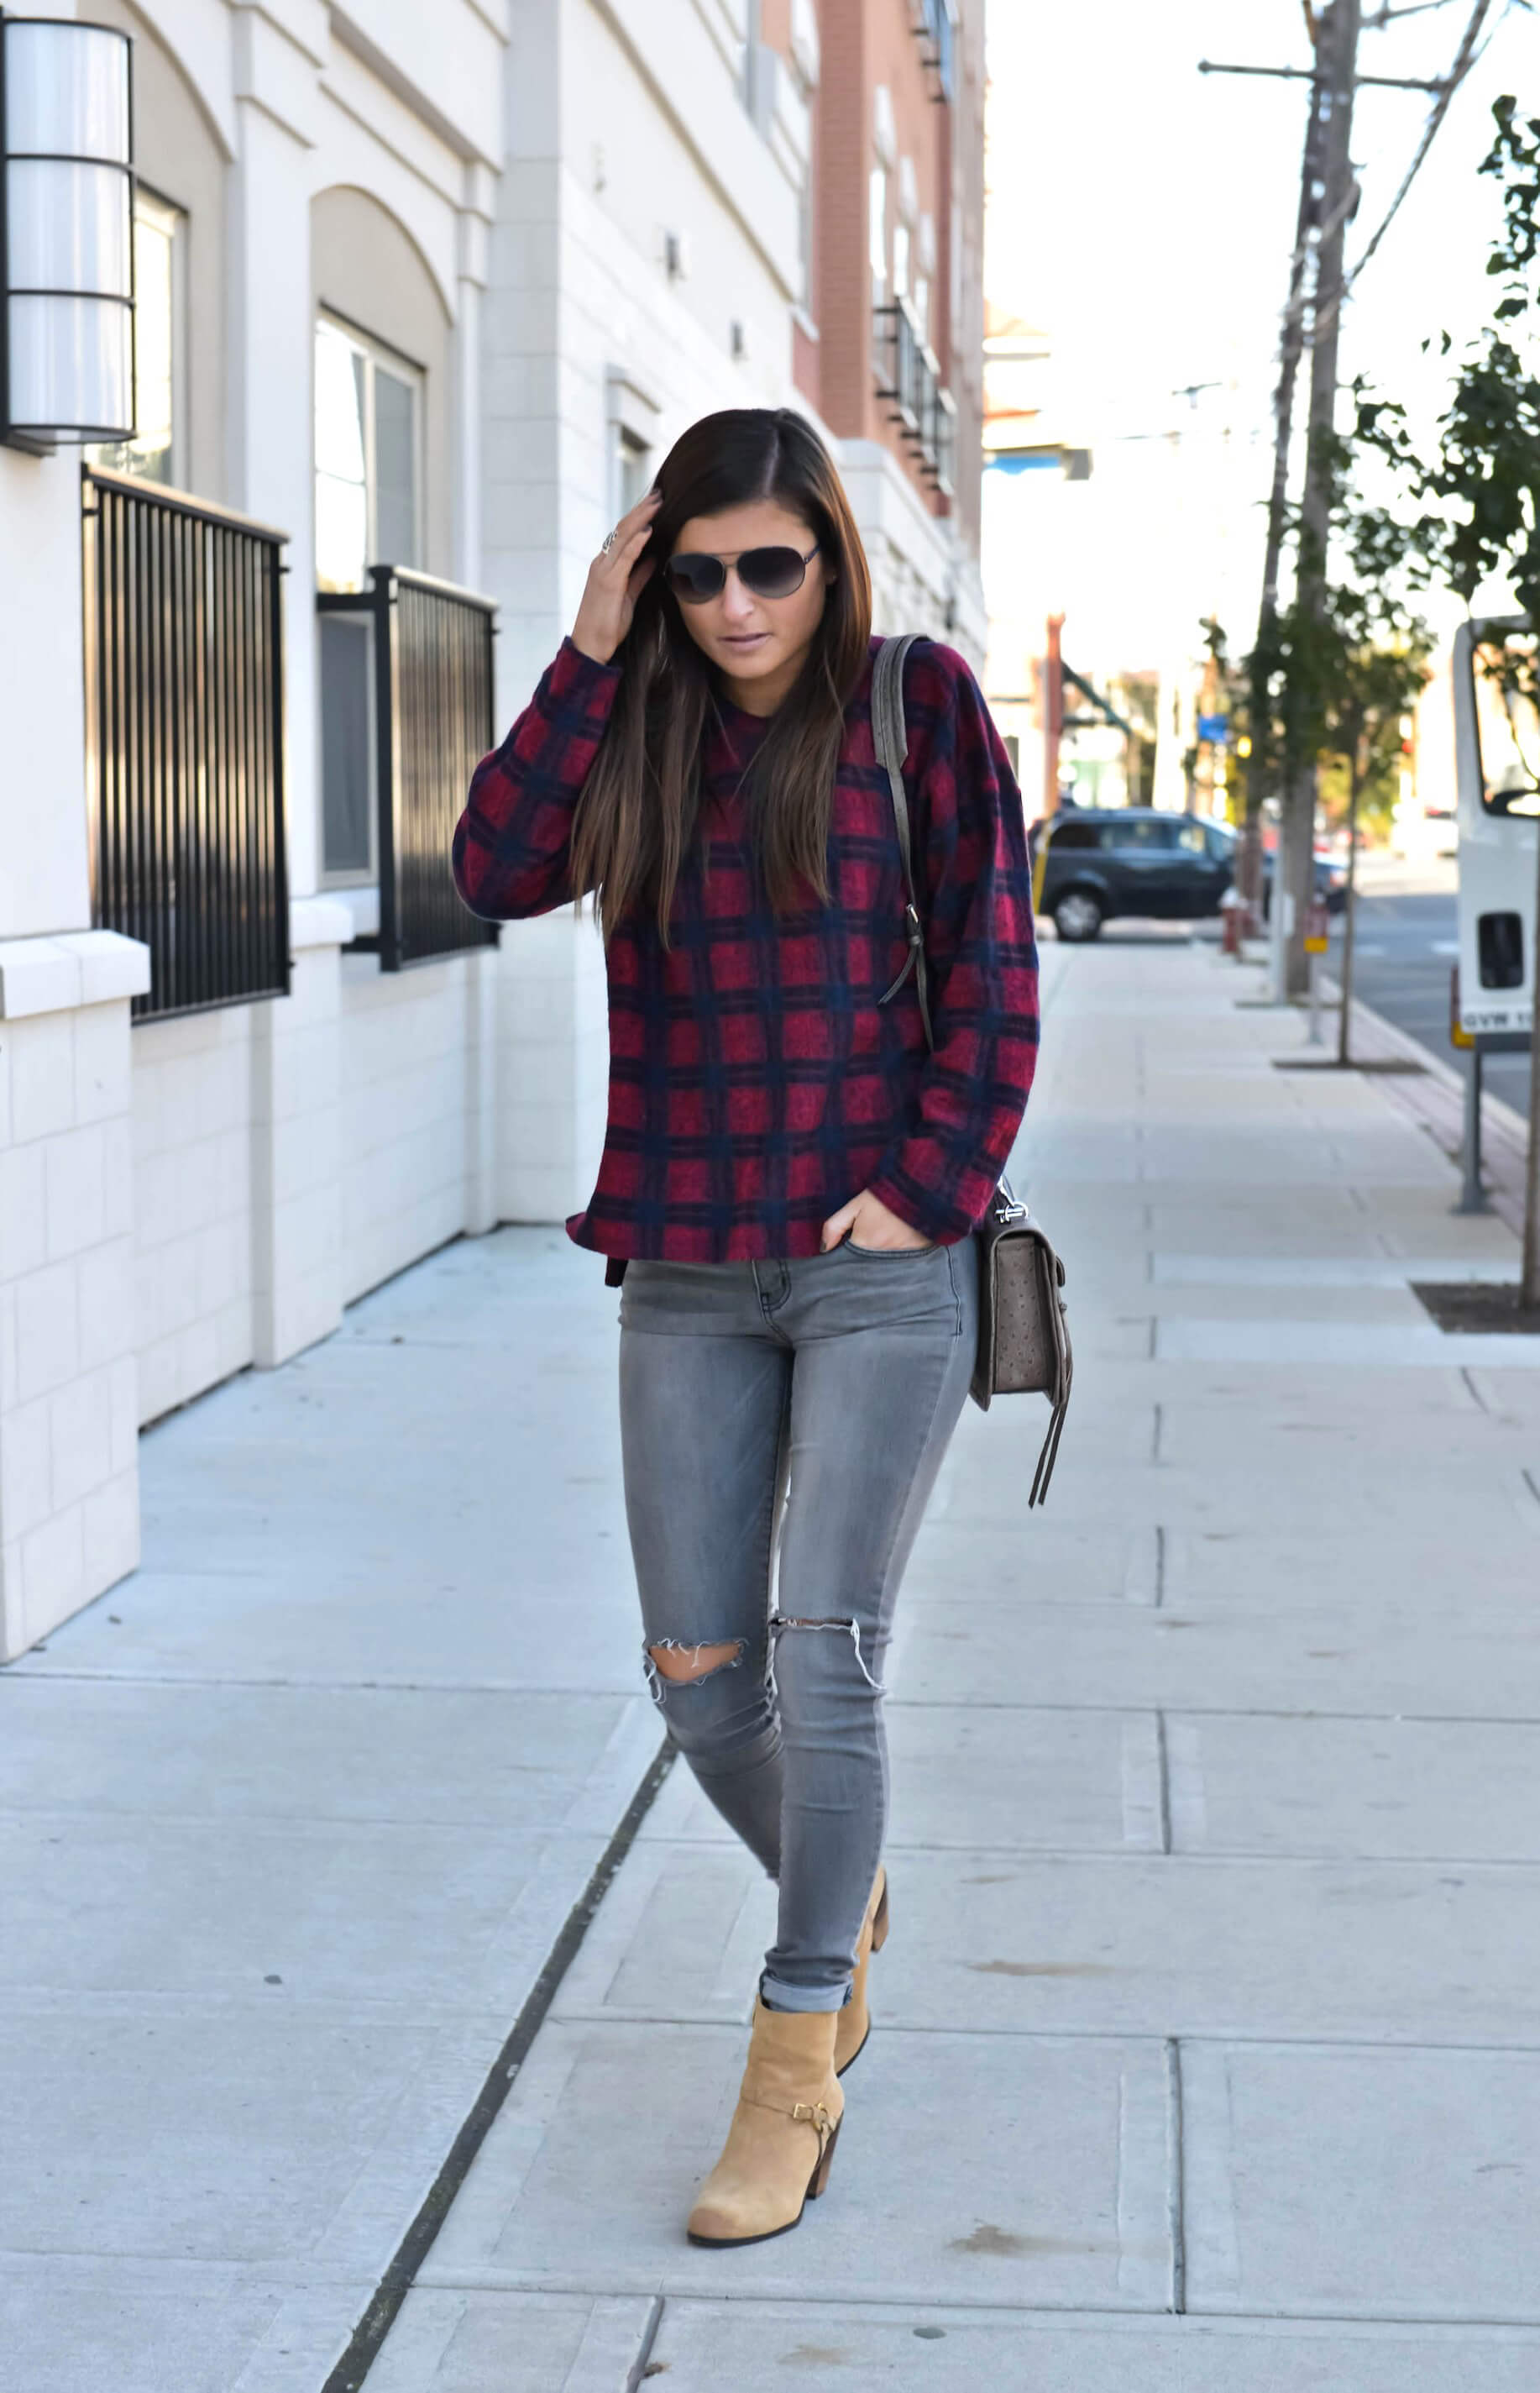 To Be Bright by Tilden Brighton - fall plaid outfit